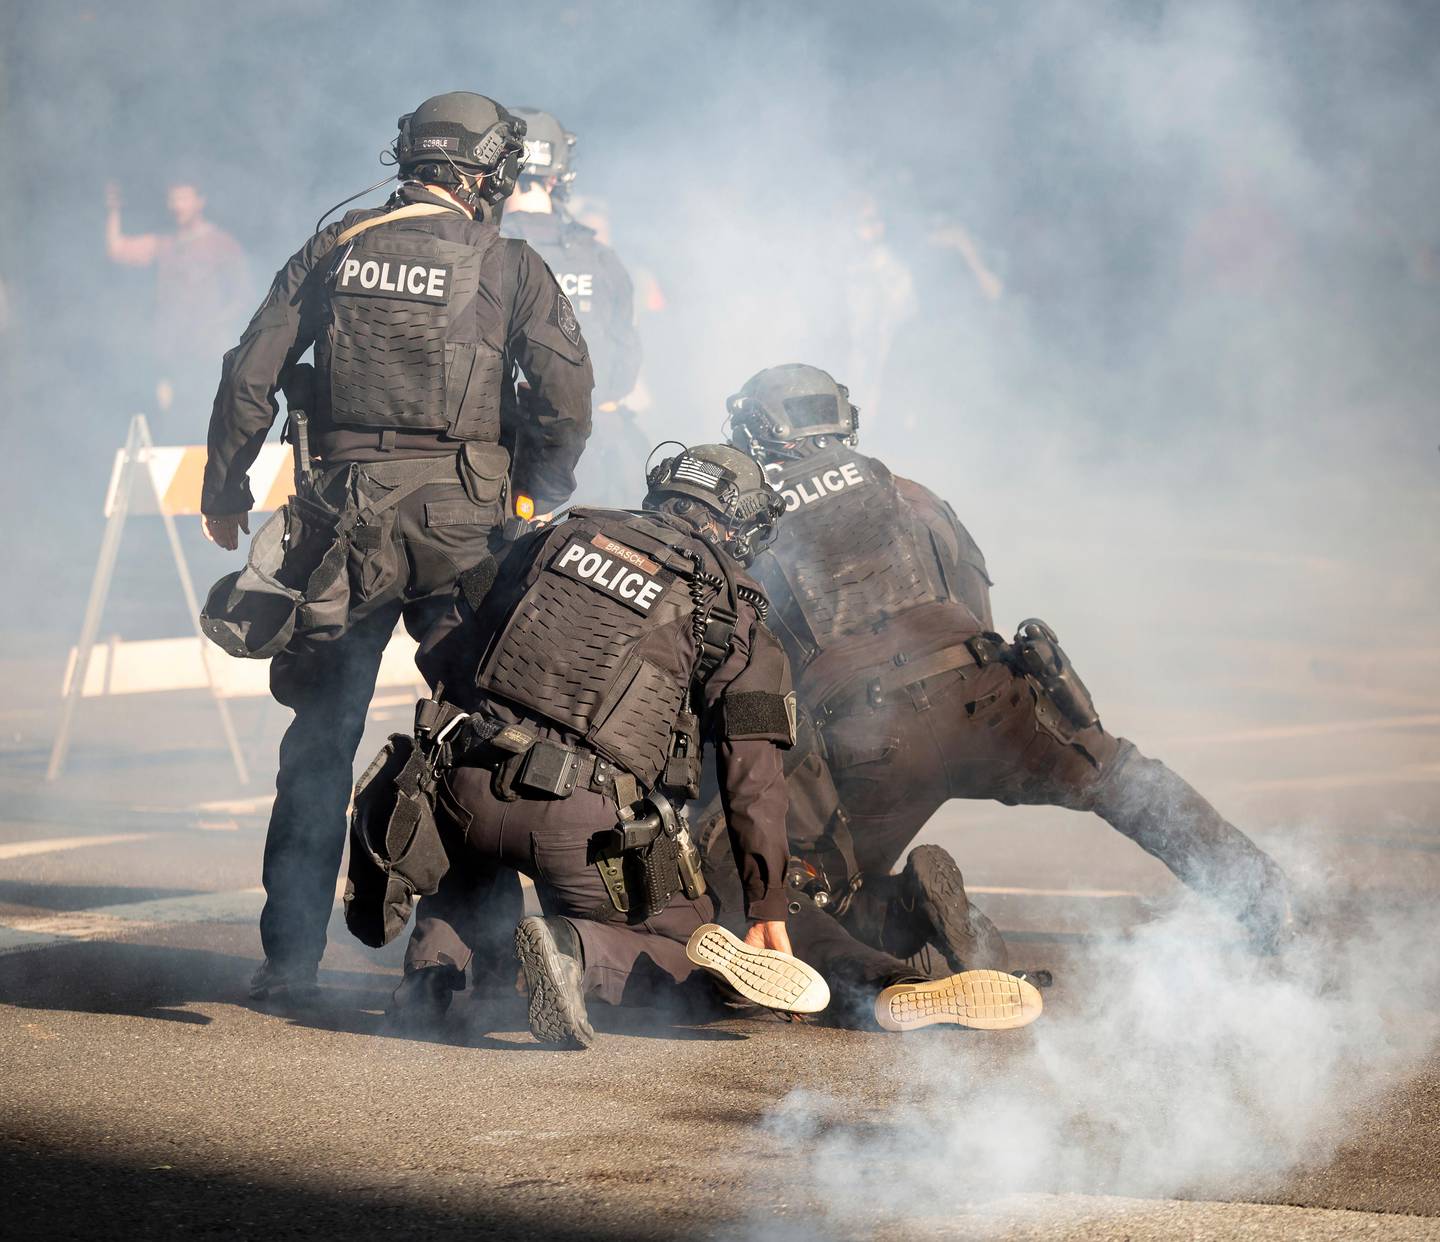 Police take down a protester in Spokane, Wash. on May 31, 2020, during a protest over the death of George Floyd on May 25.. (Libby Kamrowski/The Spokesman-Review via AP)